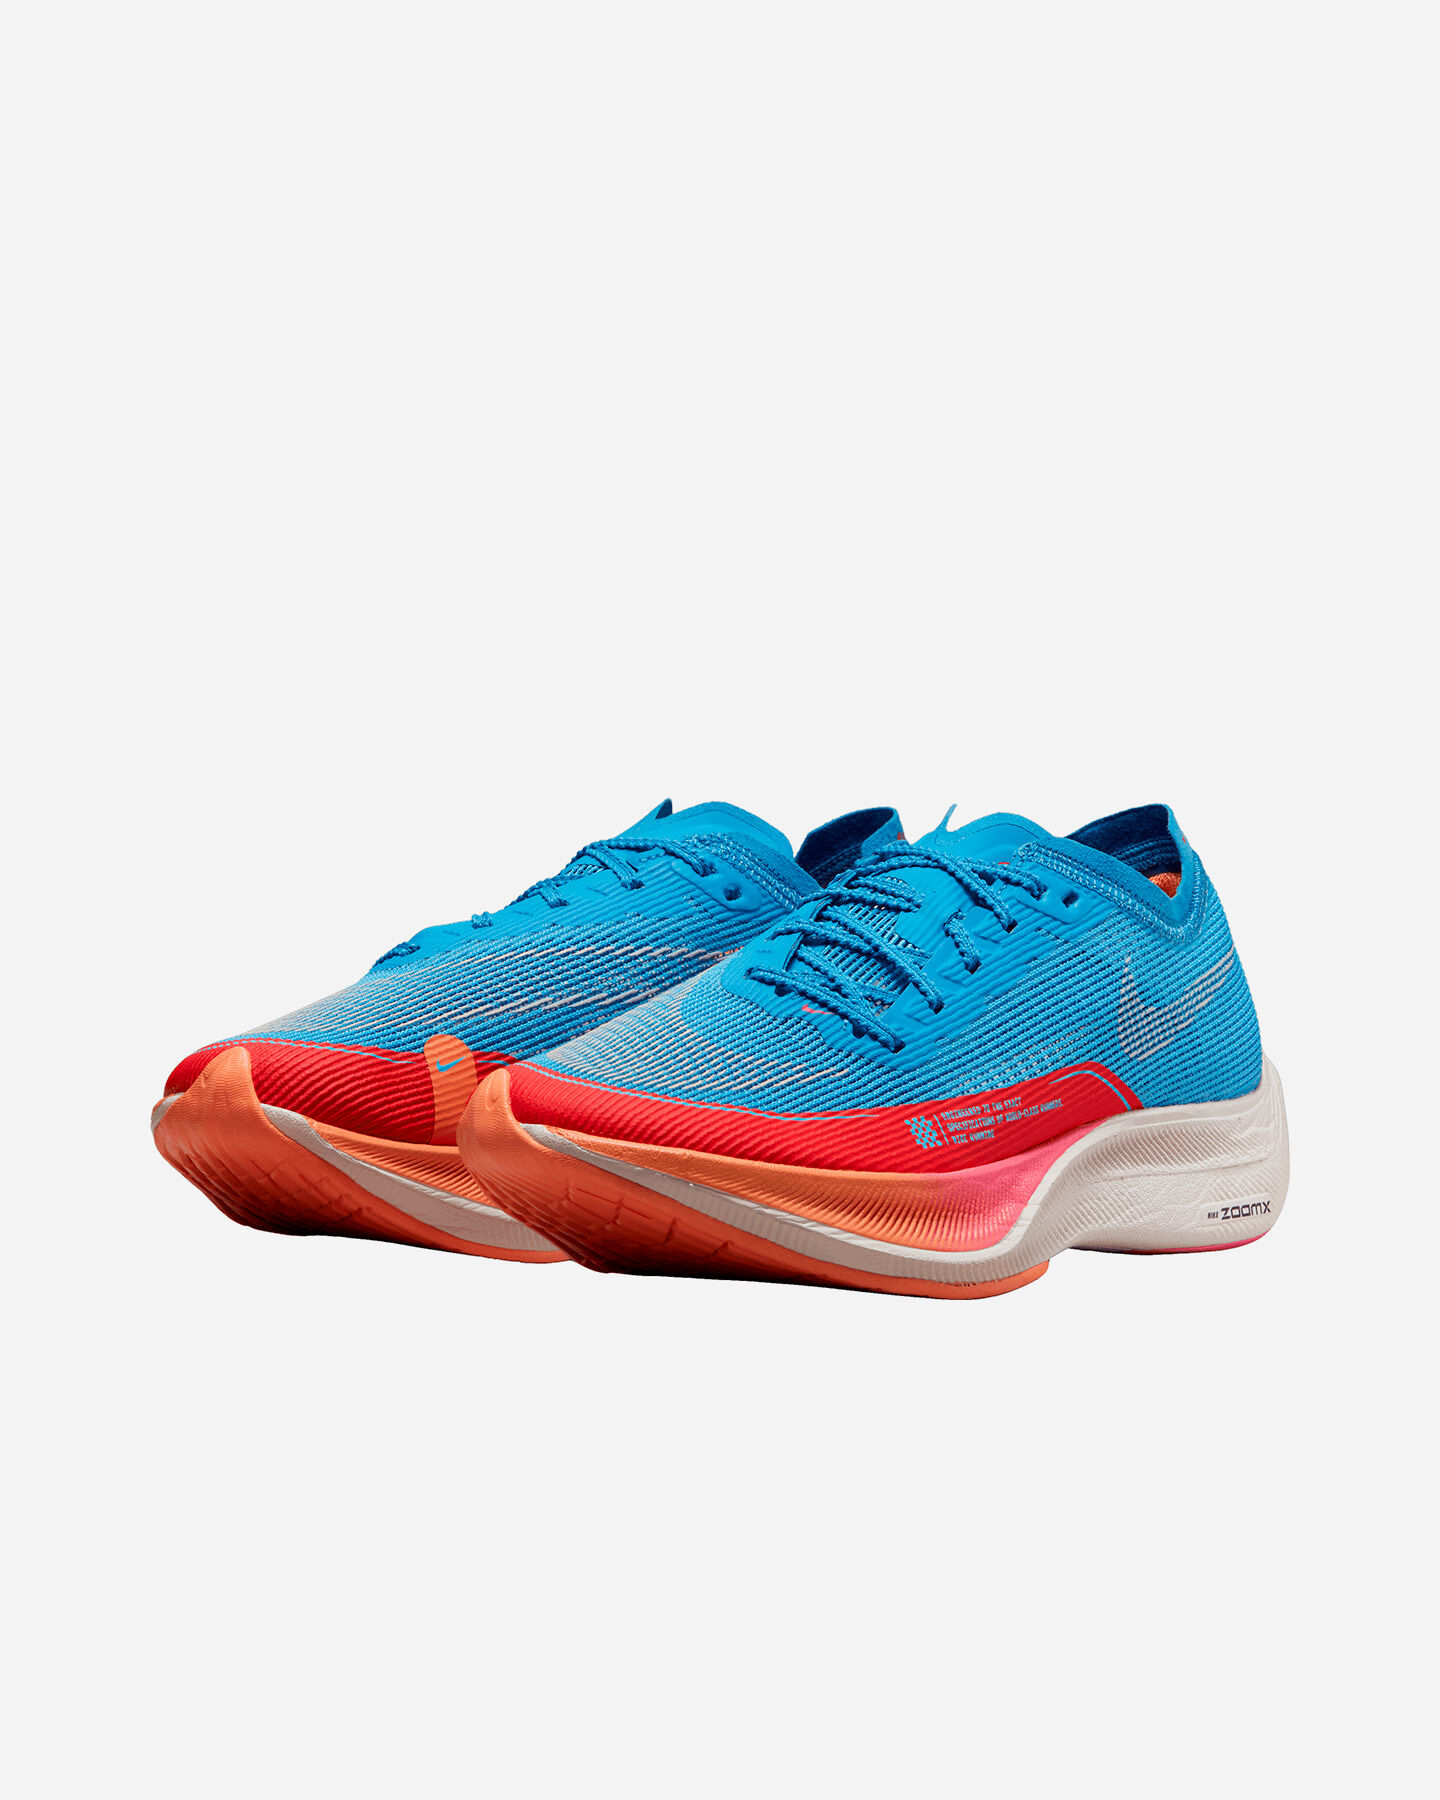  Scarpe running NIKE ZOOMX VAPORFLY NEXT% 2 W S5494914|400|5 scatto 1